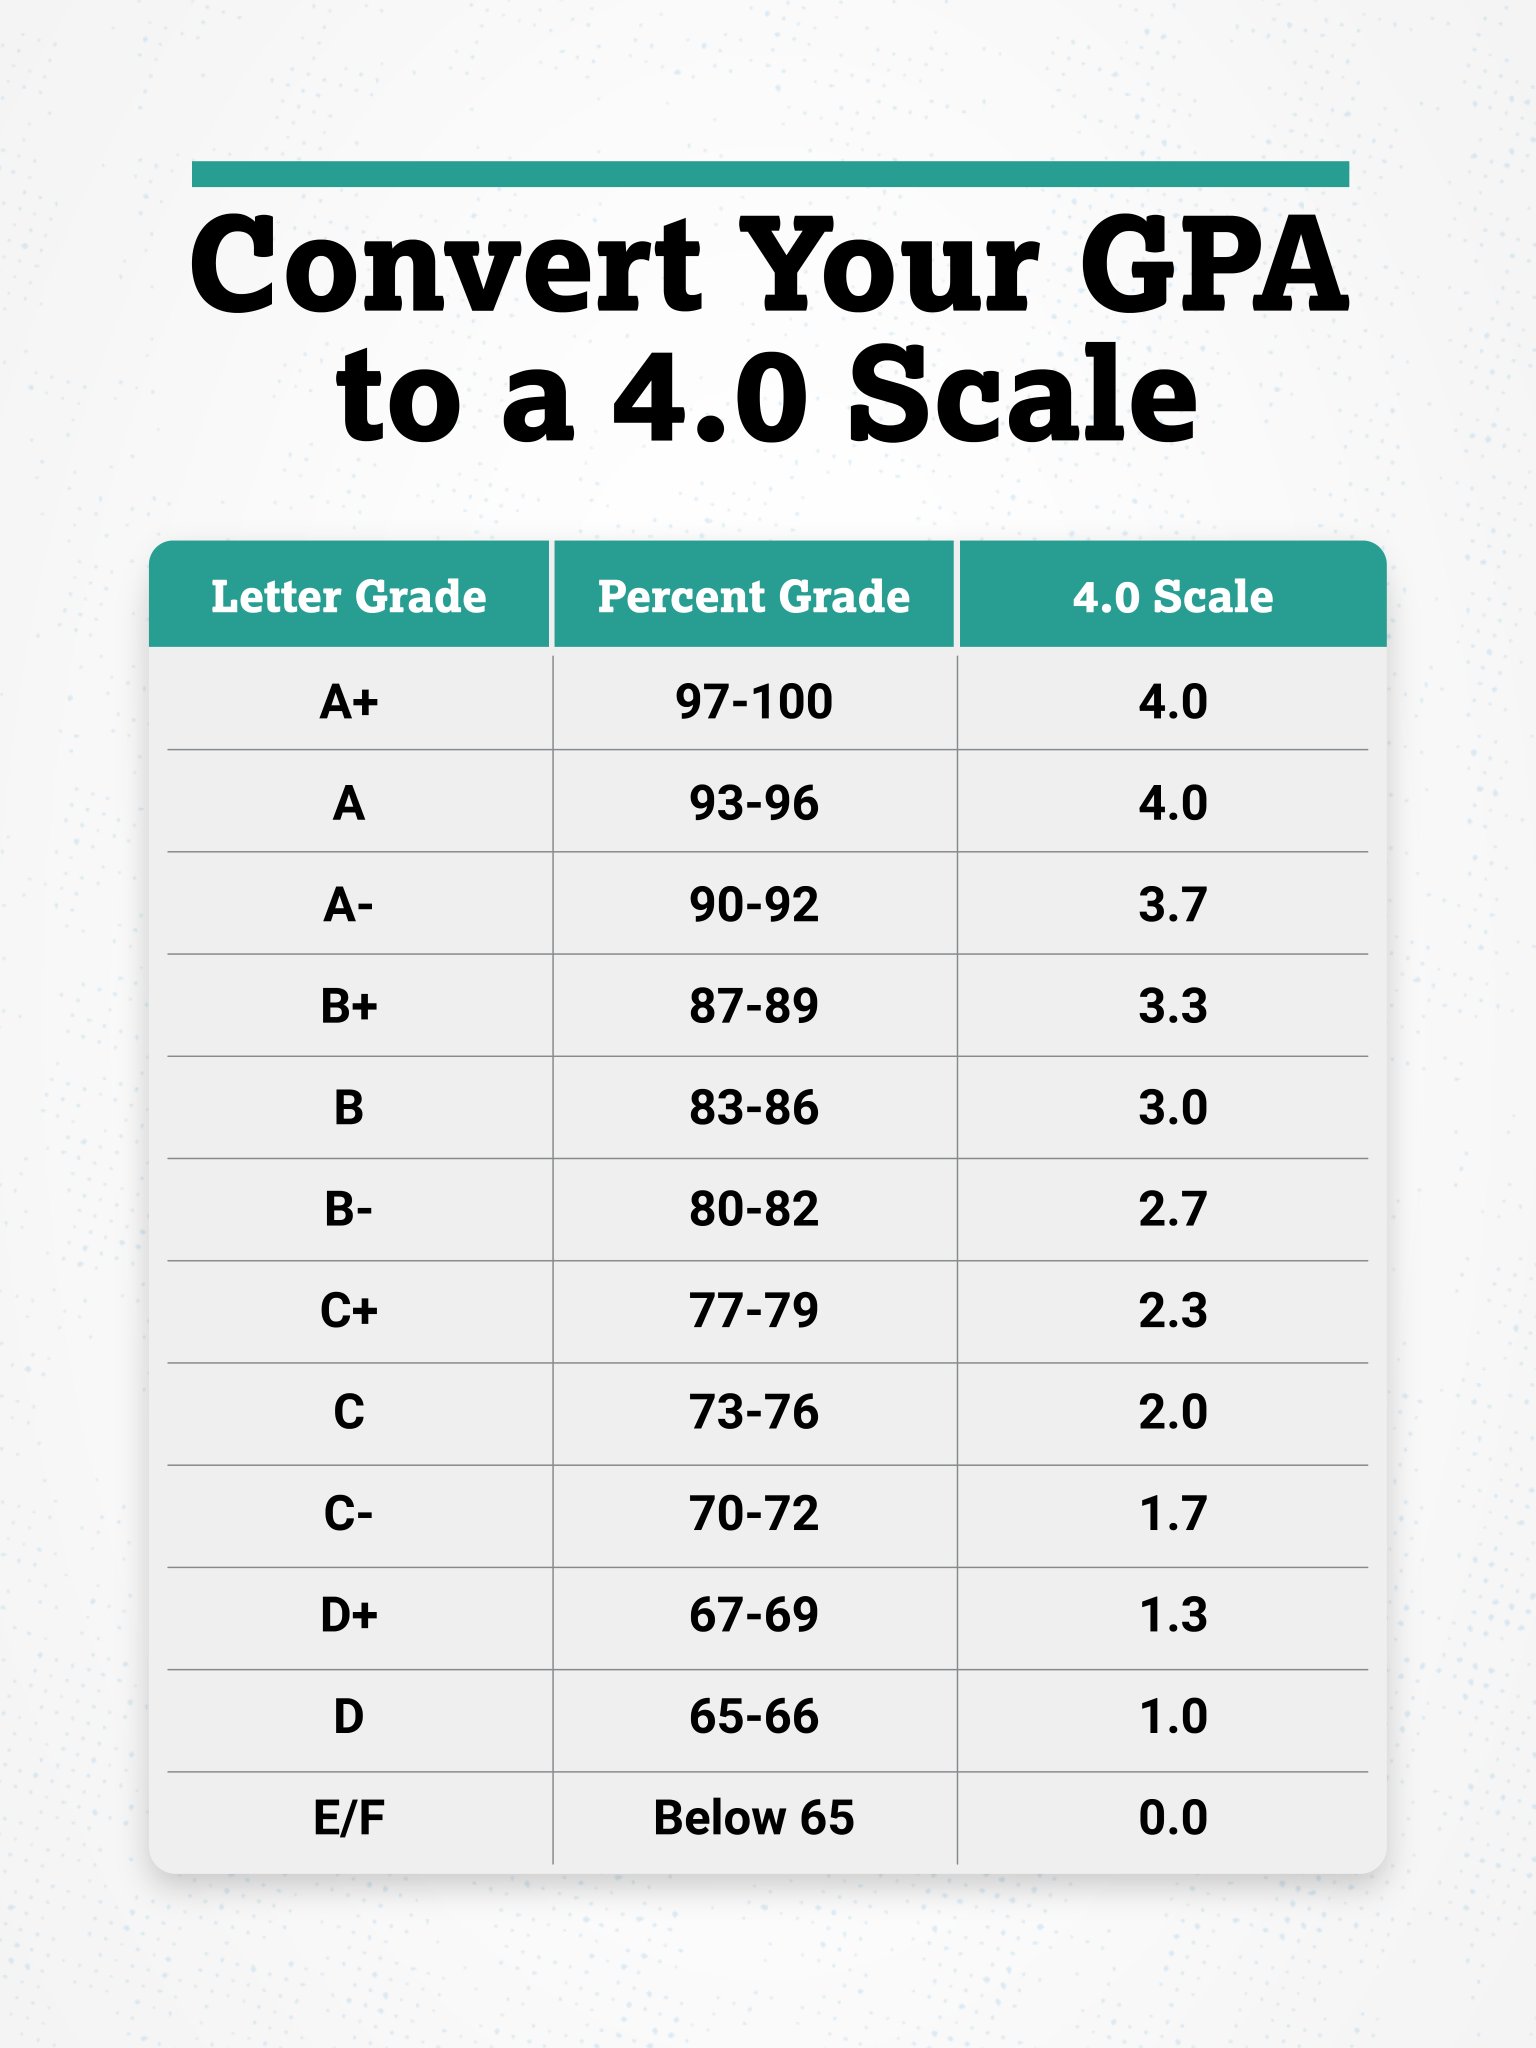 What is an F on a 4.0 scale?